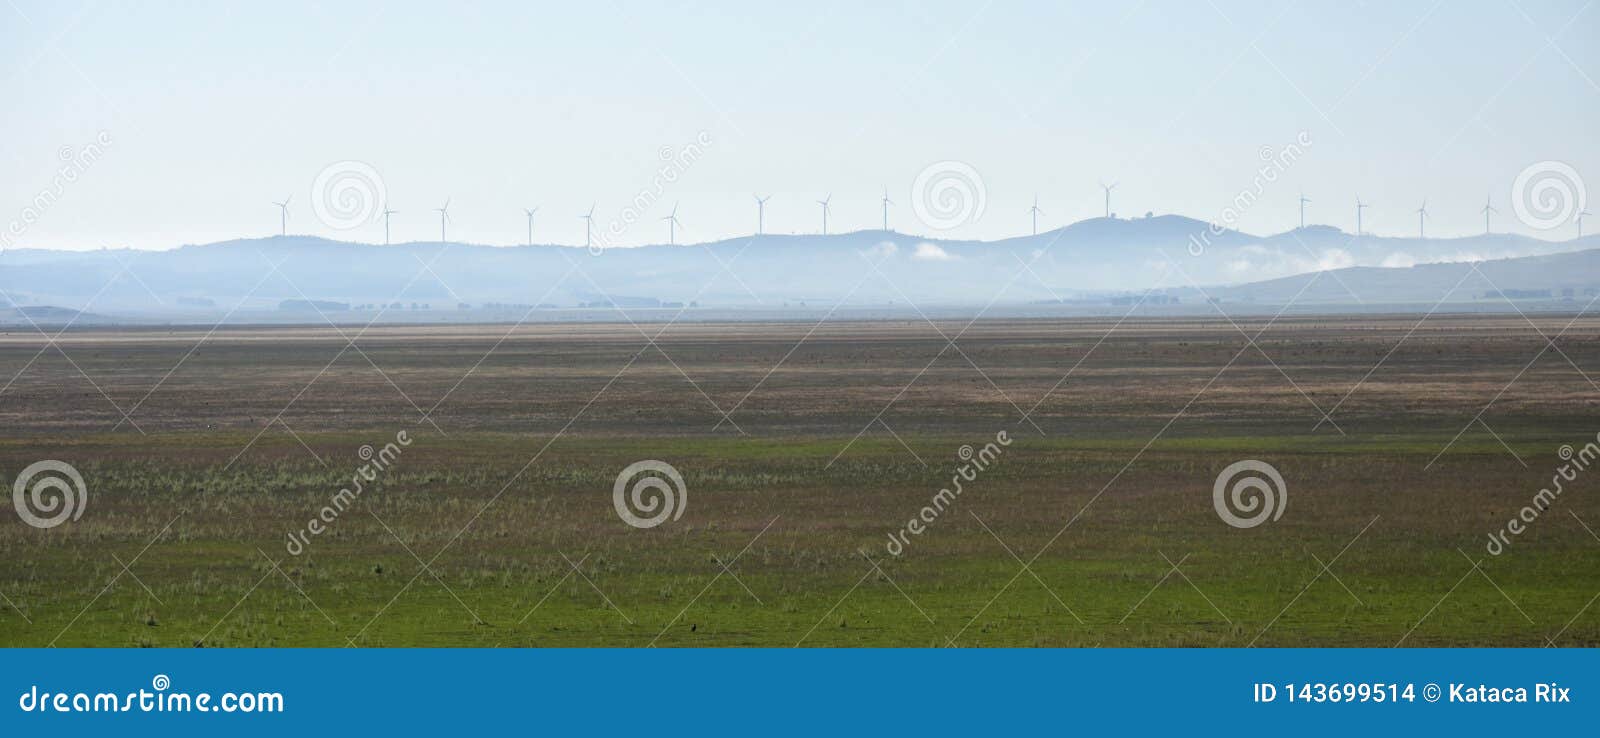 Rural Wind Farms at Lake George in Australia Stock Photo - Image of ...